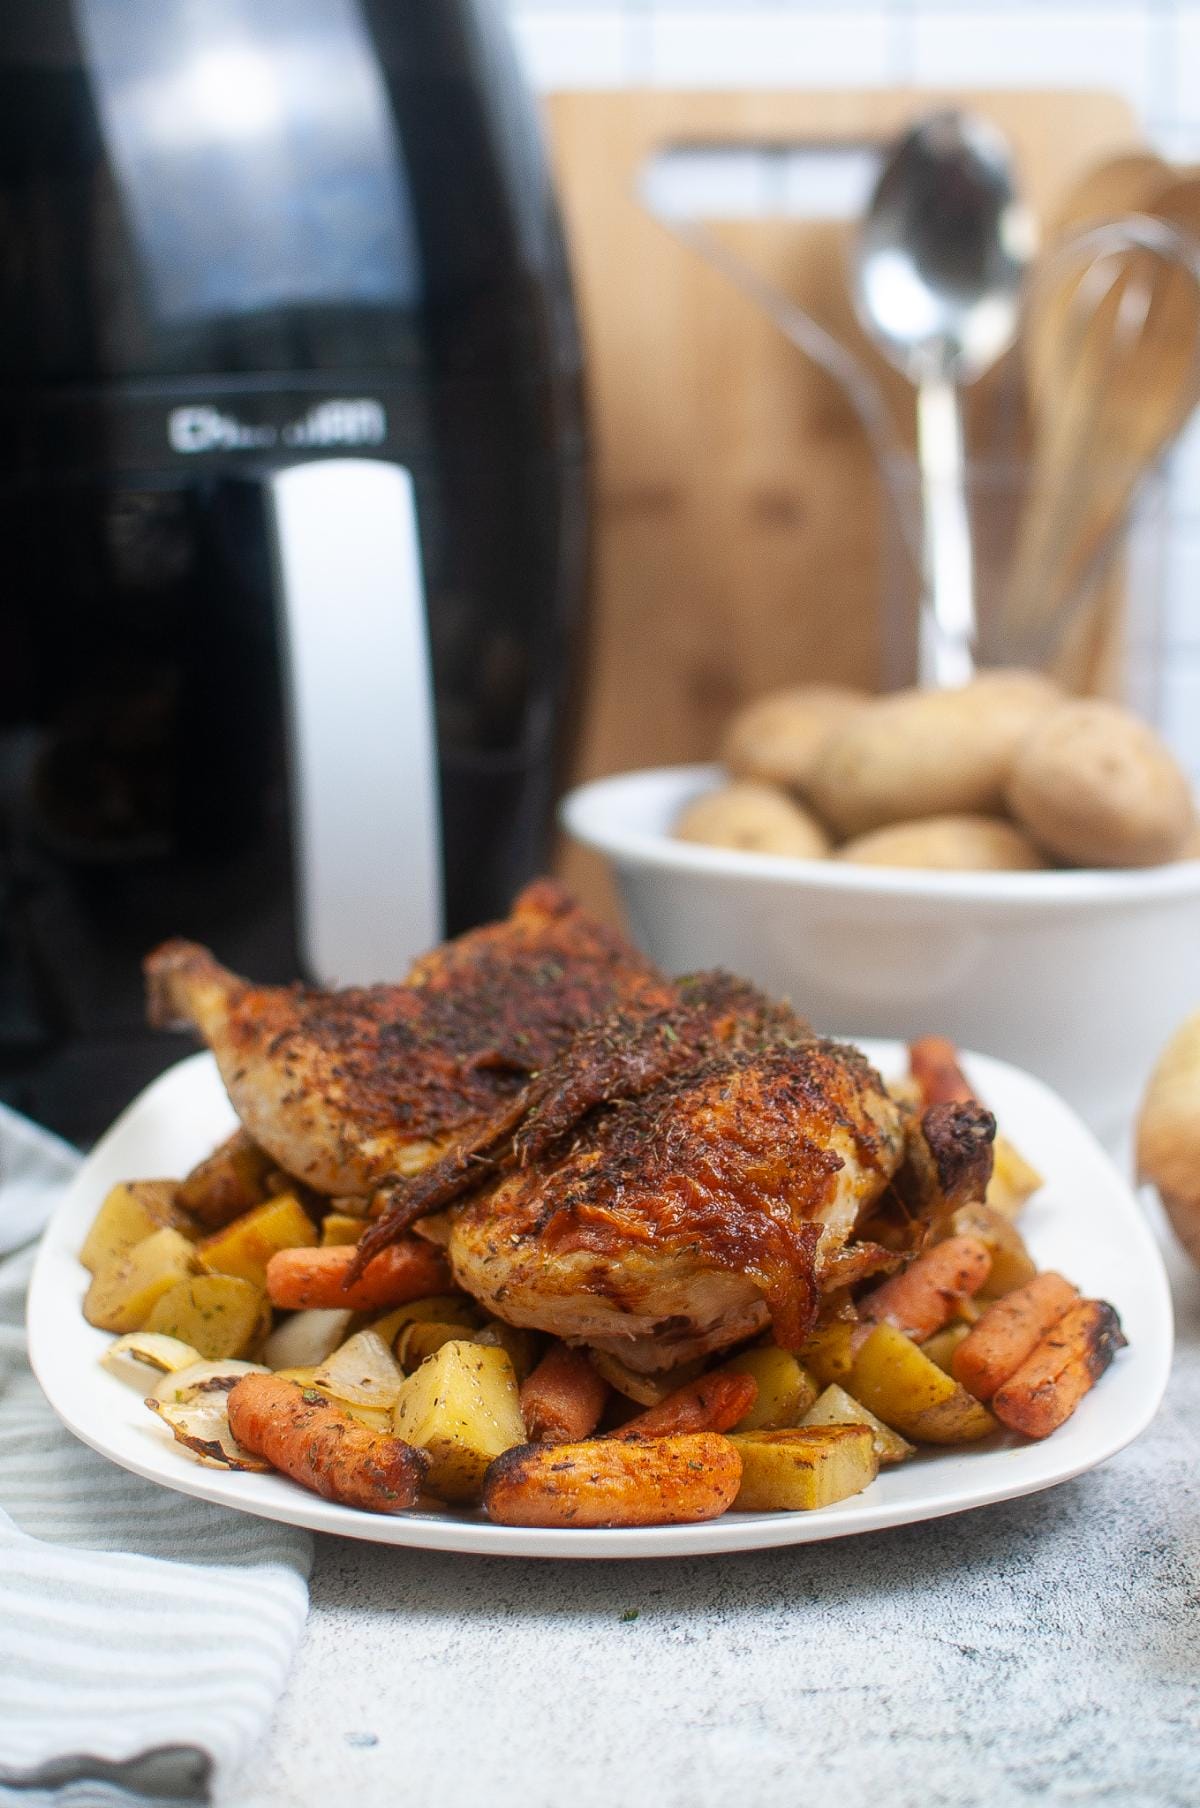 A plate with cooked half chicken and vegetables next to an air fryer.